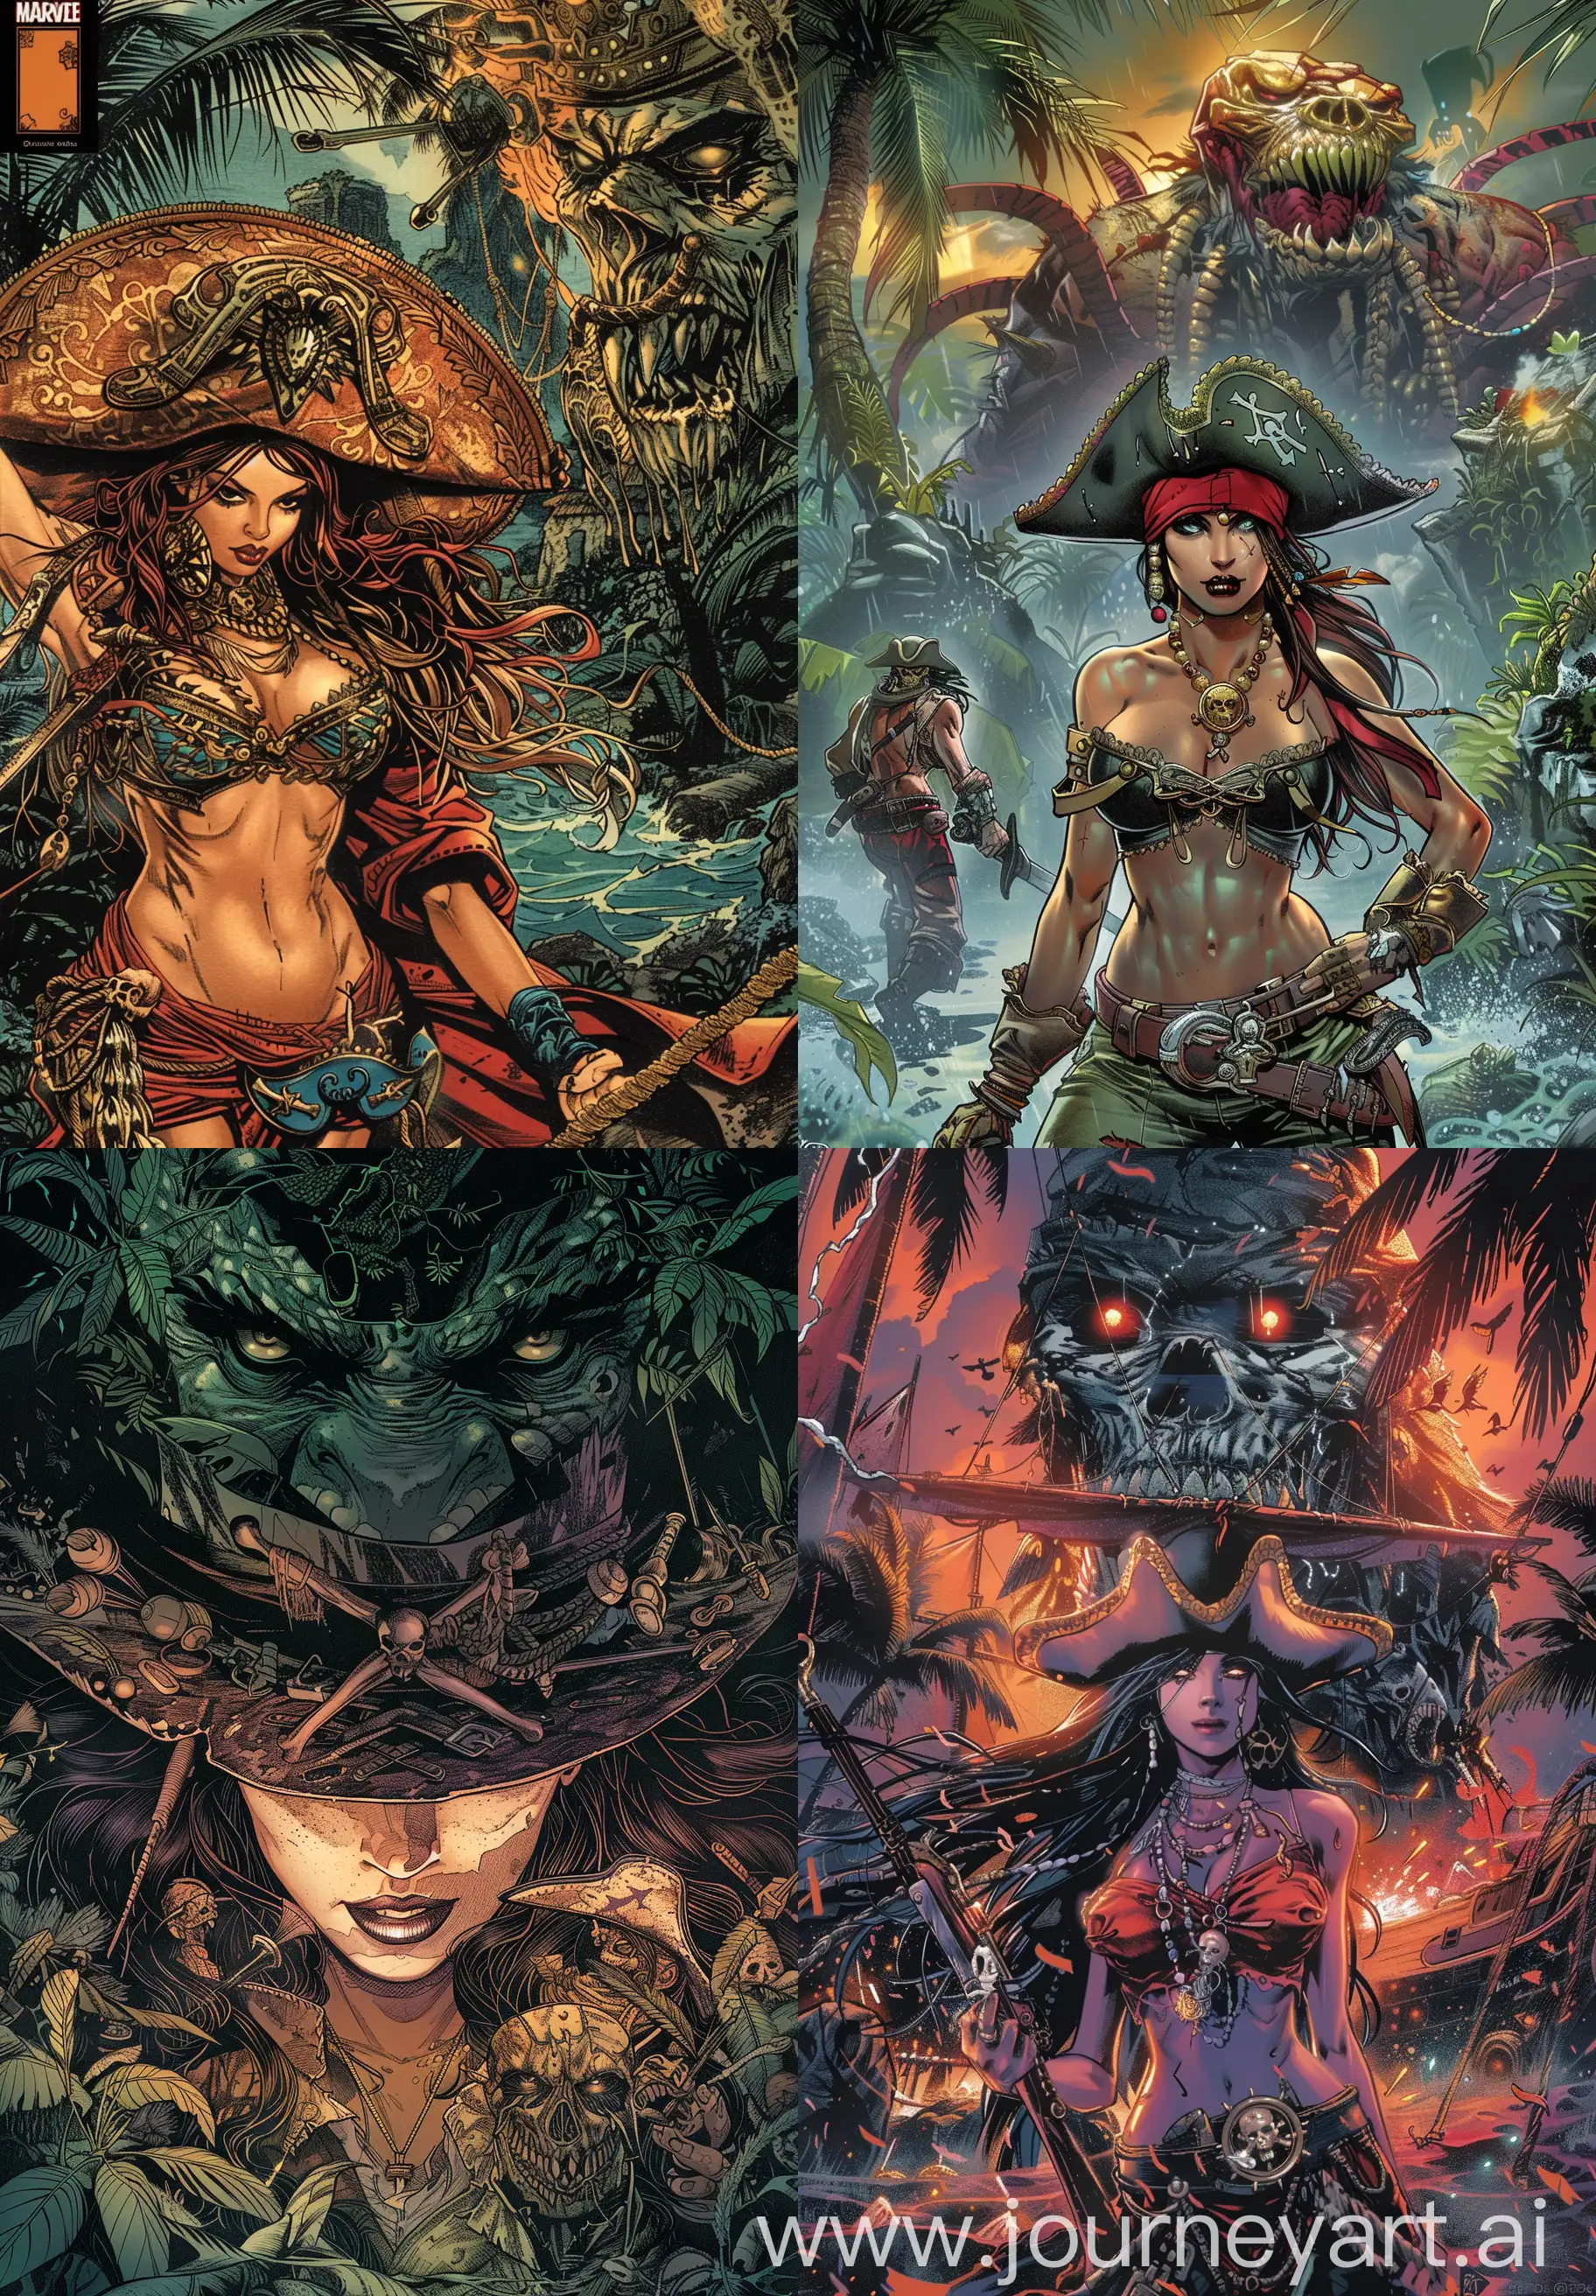 The journey of a pirate gang led by a beautiful and brave female captain to the mysterious Skull Island in search of treasure, intricate details, Jim Lee style, comic book cover style,, --ar 9:13 --v 6.0